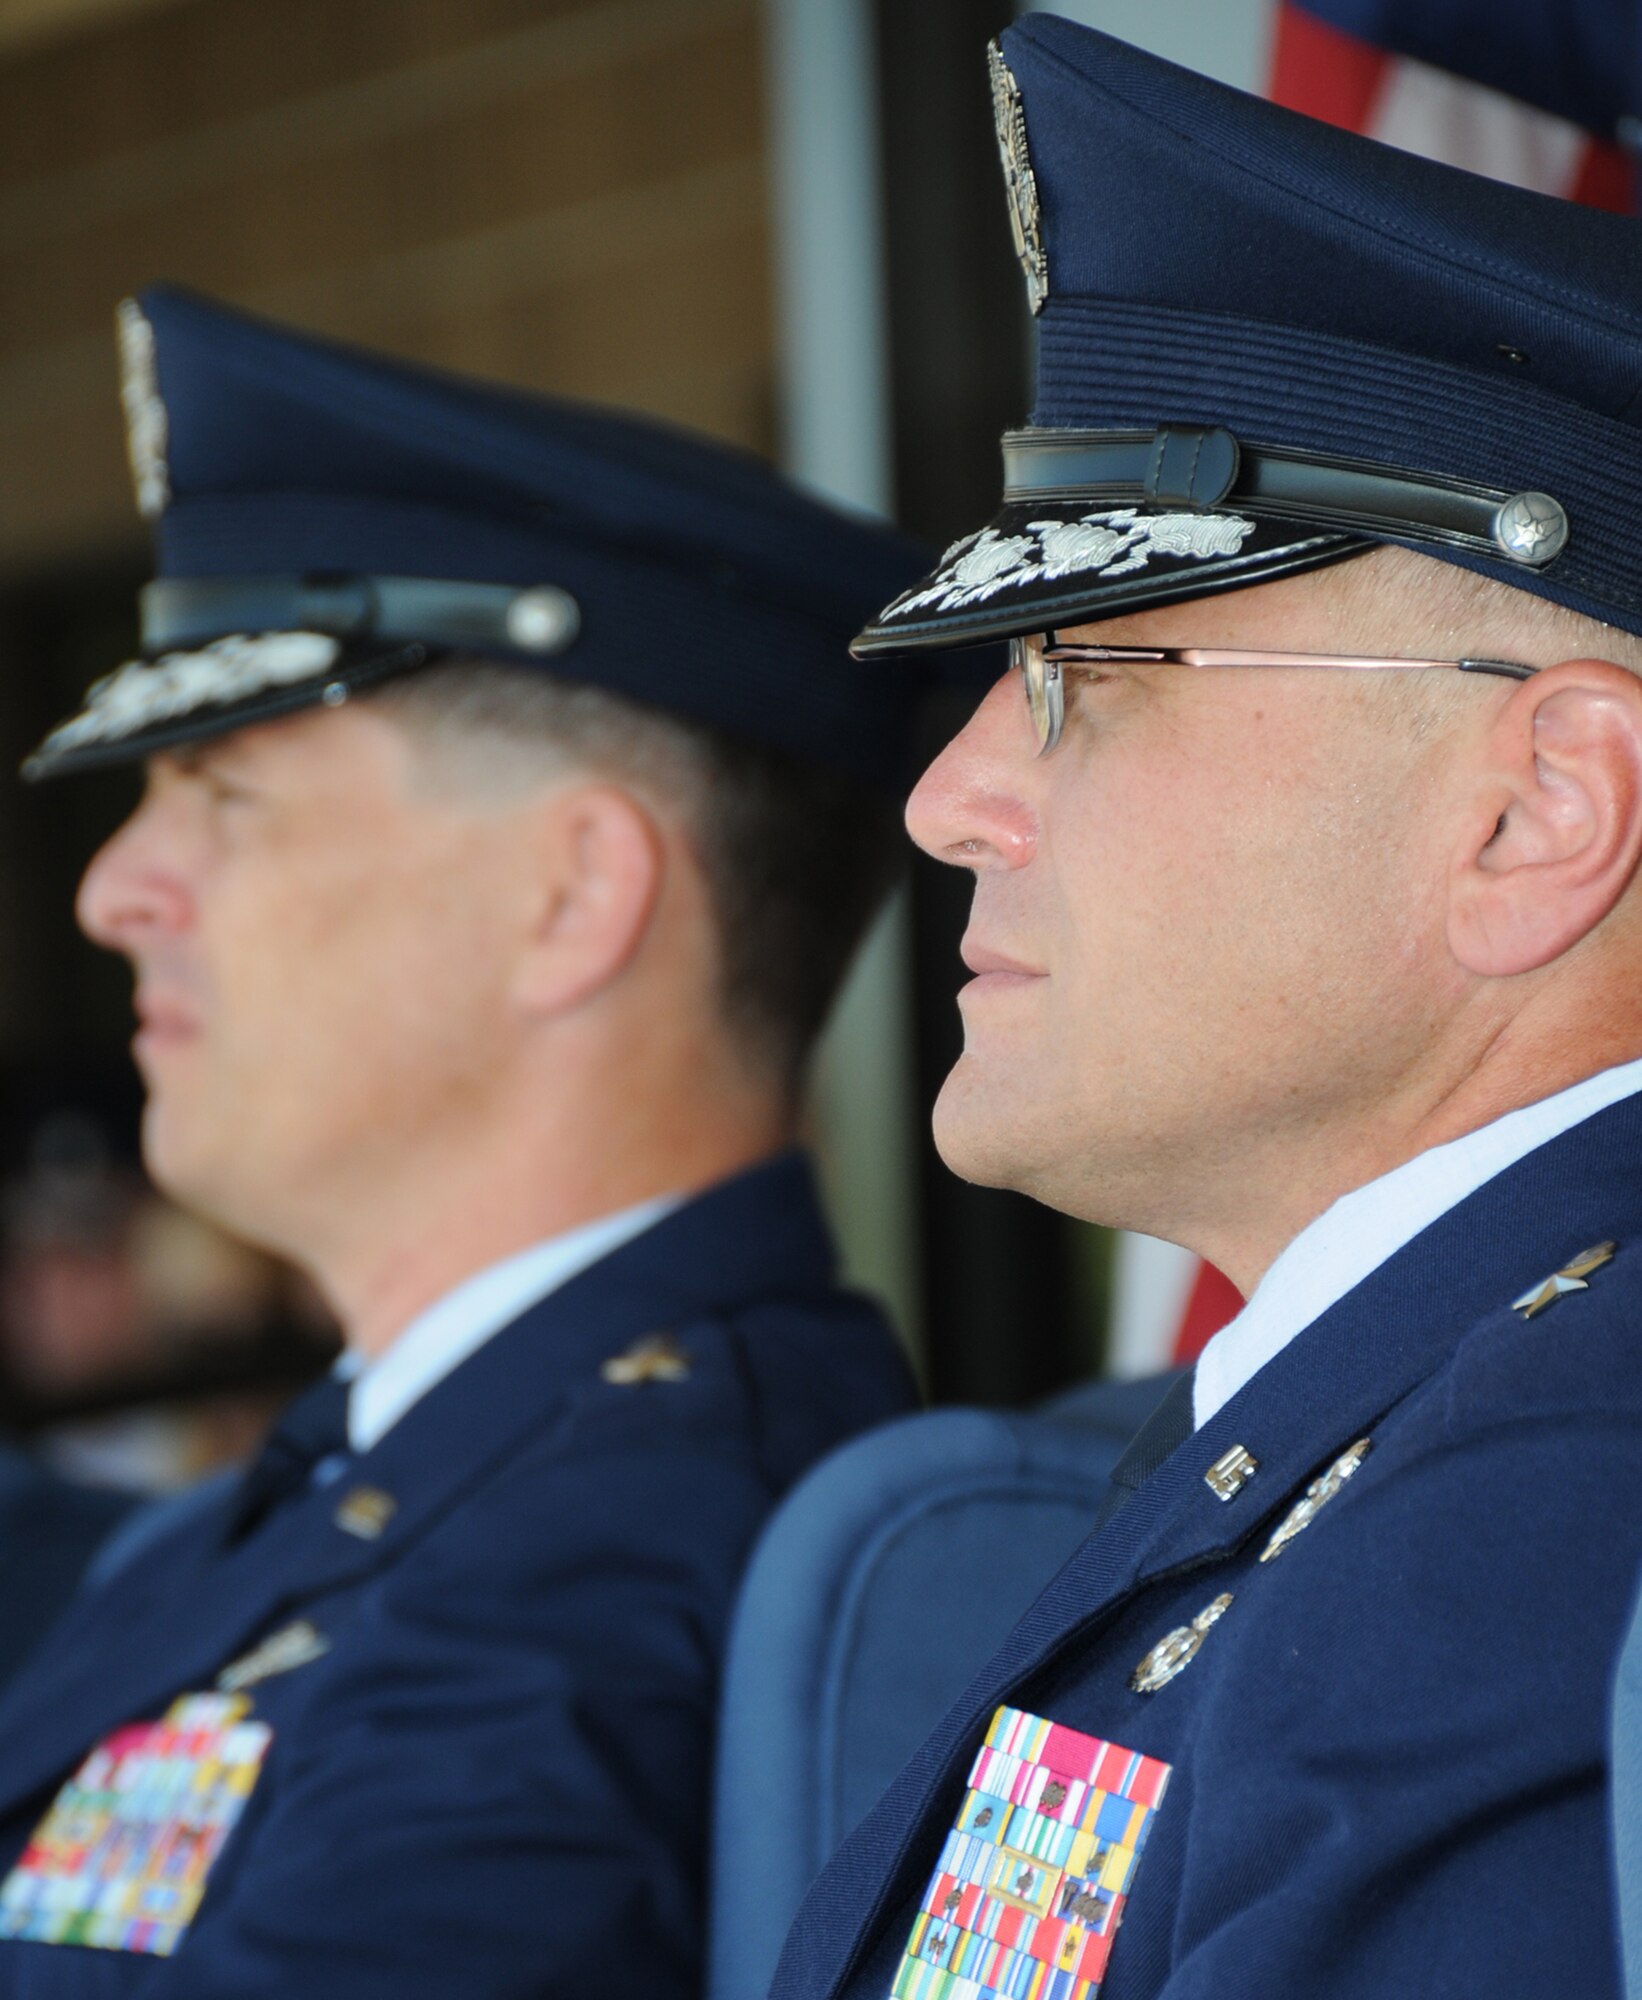 Brig. Gen. Ian Dickinson, left, prepares to relinquish command of the 81st Training Wing to Brig. Gen. Andrew Mueller during Monday’s ceremony on the parade field.  Maj. Gen. Mary Kay Hertog, 2nd Air Force commander, officiated.  General Mueller comes to Keesler from Eskisehir, Turkey, where he was the deputy commander for NATO’s Combined Air Operations Center 6, Allied Air Forces Southern Europe.  General Dickinson will serve as Director, Communications and Information, and Chief Information Officer for Air Force Space Command.  (U.S. Air Force photo by Kemberly Groue)